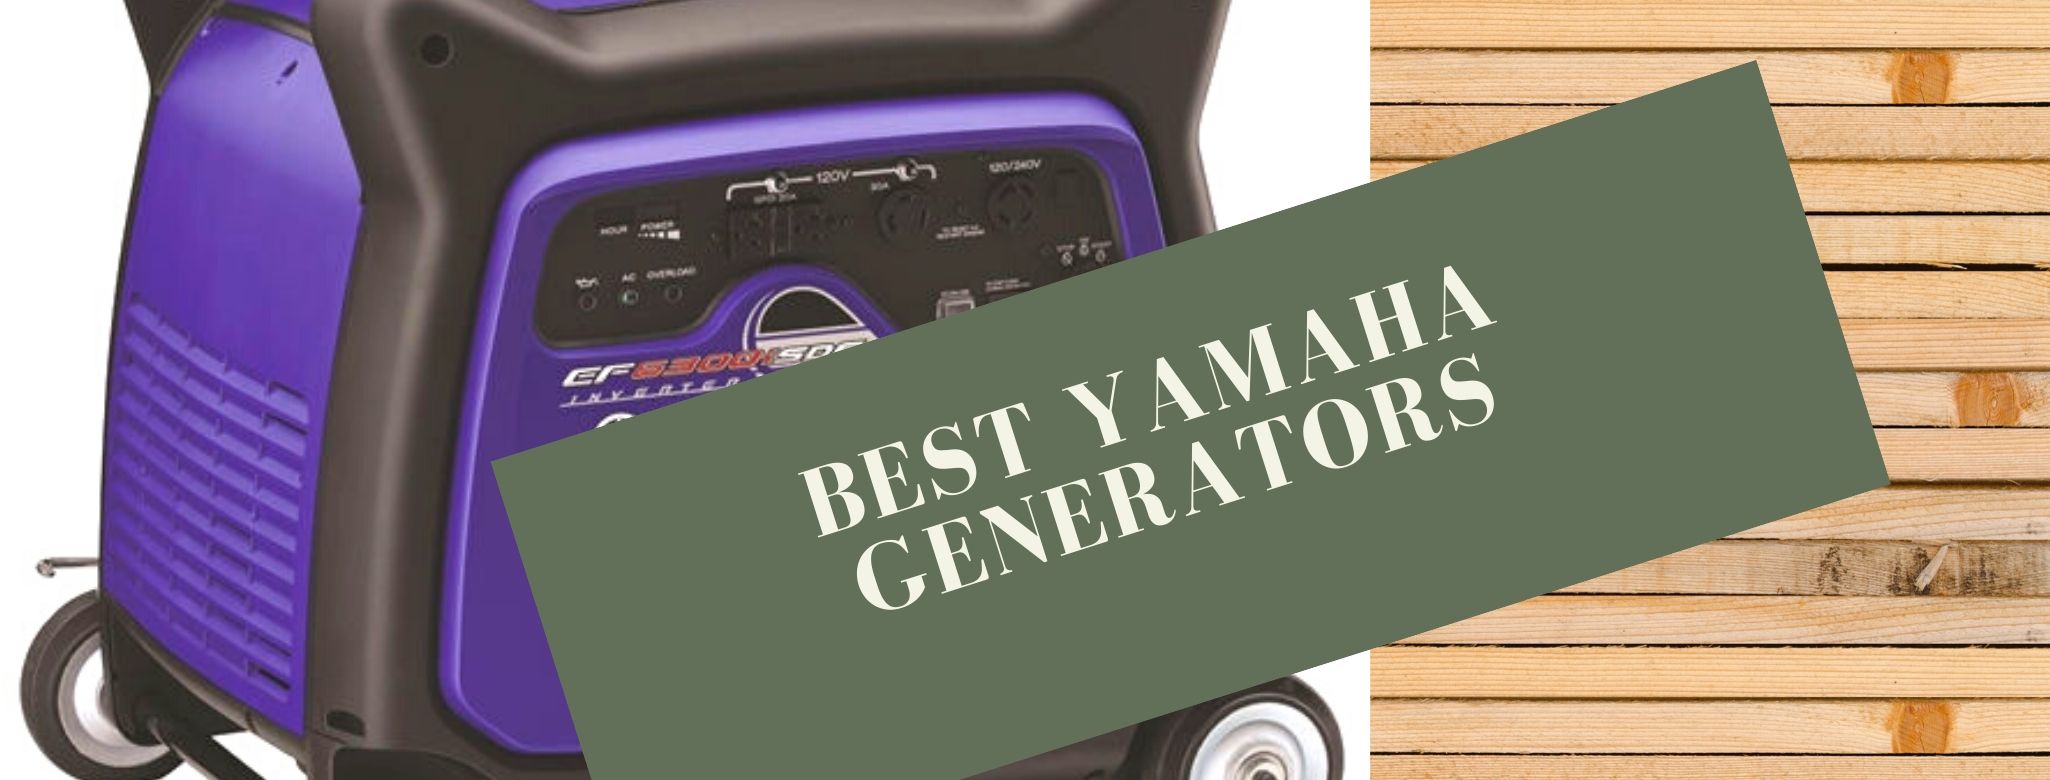 Top-rated Yamaha inverter and portable generators